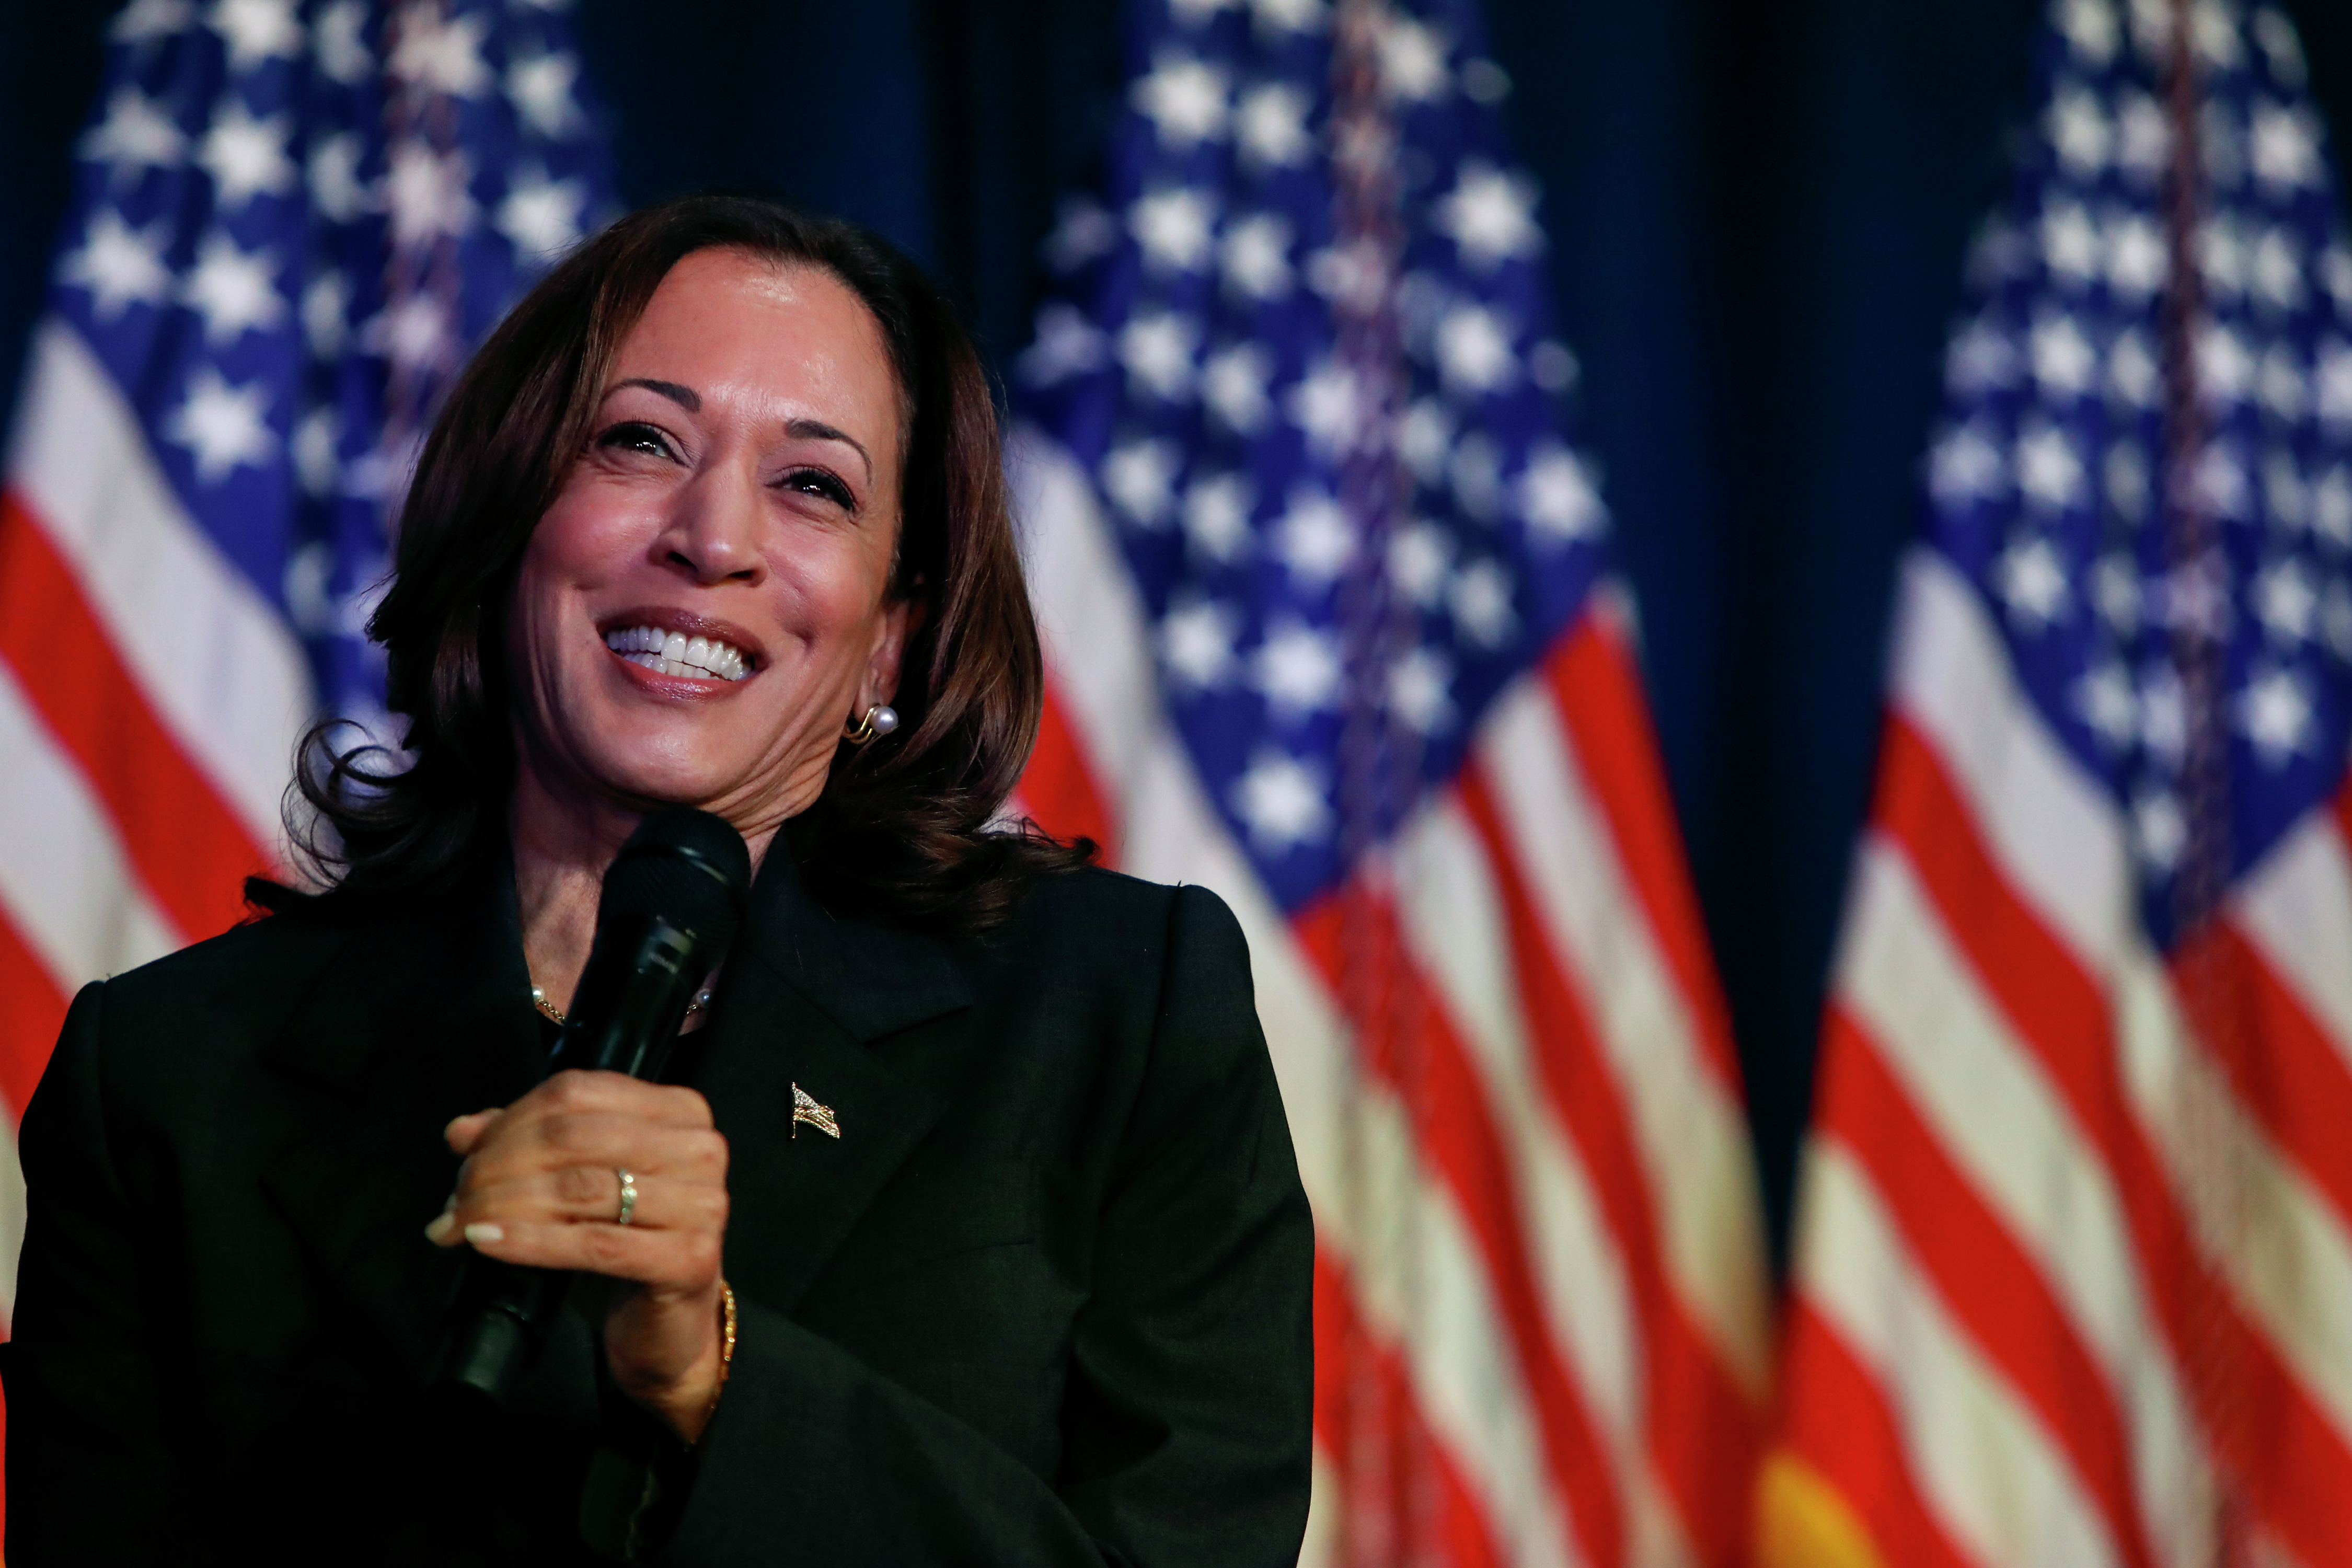 NEWSLINE: With Democrats endorsing Harris as president, who will be her VP?